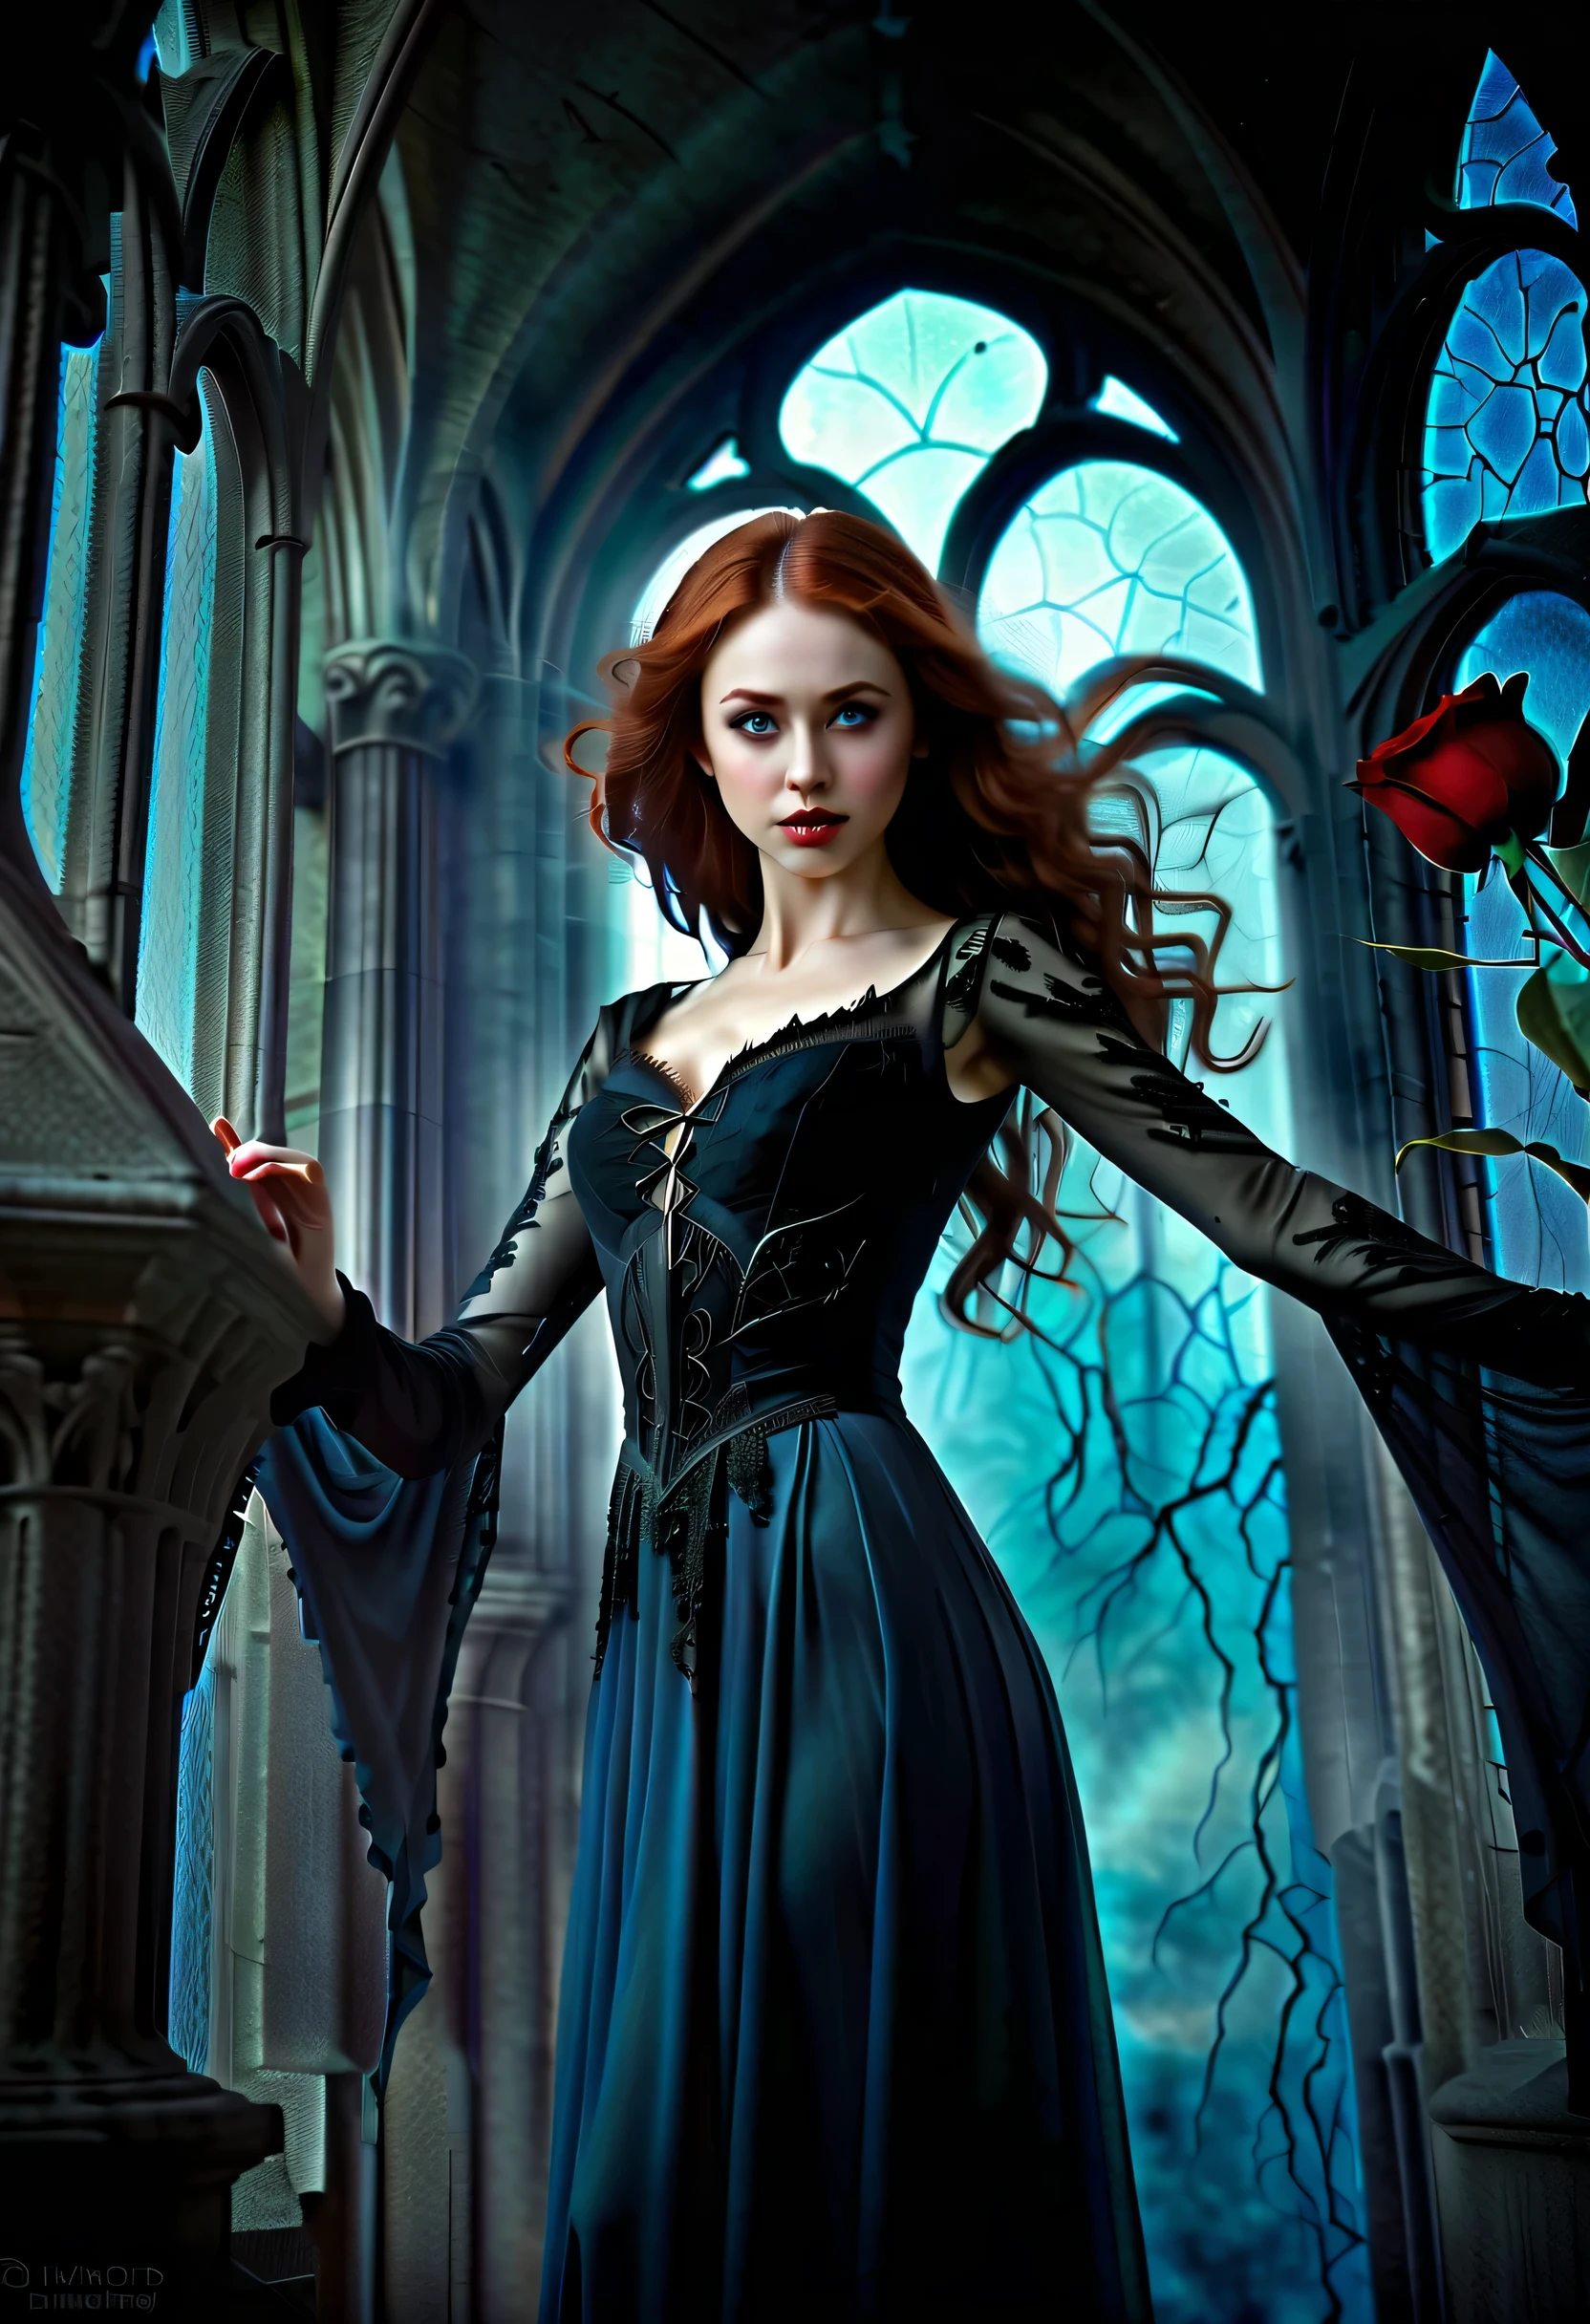 A young beautiful girl with delicate flawless skin, long curly red hair, blue eyes, wearing a blue Victorian dress with red accents and lace. the background is the interior of an old Gothic church in semi-darkness, the only light comes from the moon whose rays fall through the stained glass window, illuminating the girl's face. dust particles illuminated by the moon give a dark atmosphere, Gothic art, Baroque, Realism, depth of field, backlighting, highres, 16k, best quality, high quality, textured skin, Vampire Princess, 18years old, breathtakingly beautiful, (blue eyes high quality, masterpiece:1.2), ultra-detailed, (realistic, photo-realistic:1.37), softly glowing pale skin, pure blooded, porcelain-like complexion, elegant and refined features, graceful posture, dark and mysterious atmosphere, gothic fashion, flowing black lace dress, touch of red in her clothes, dainty silver jewelry with ruby accents, subtle yet captivating smile, slightly pointed canines, translucent wings resembling bat wings, subtle shimmering effect on her wings, gardens filled with blooming blood roses, vivid red petals contrasted with the darkness, enchanting moonlit night, dark and hauntingly beautiful castle in the background, splashes of moonlight illuminating her ethereal beauty, dark shadows and dramatic lighting, icy stare that freezes the hearts of those who dare to meet her gaze, air of authority and power, symbol of both danger and allure, night sky filled, photorealistic, Realism, Gothic art, Romanticism, cinematic lighting, 4k, 8k, highres, UHD